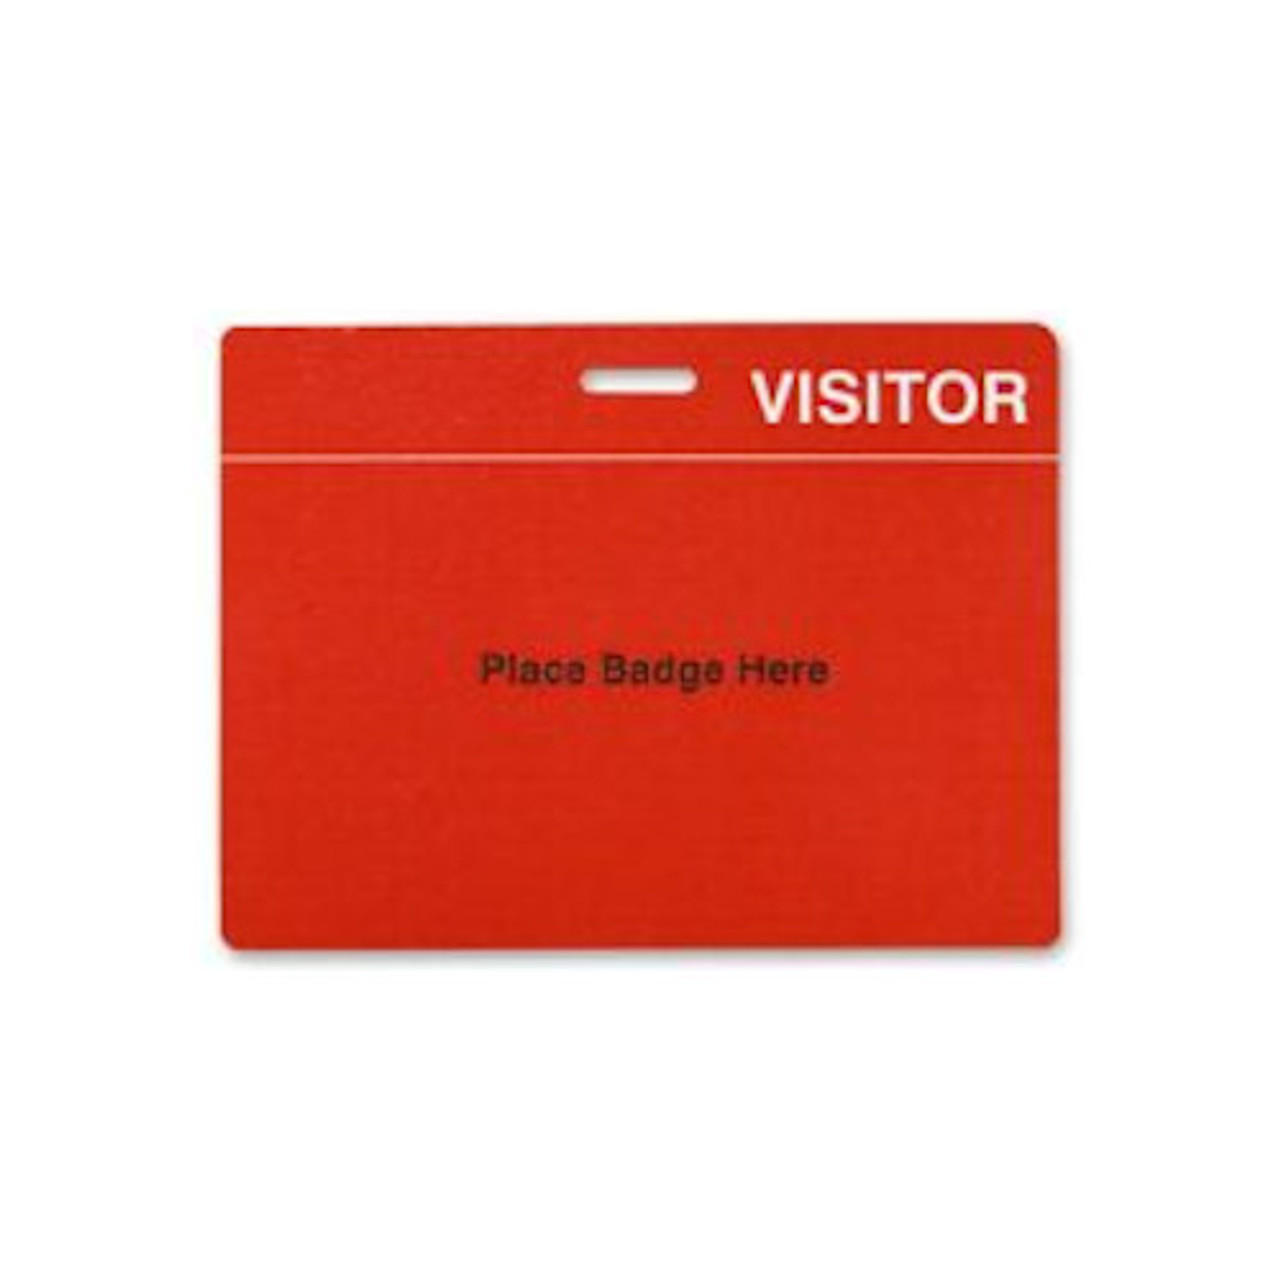 DYMO LabelWriter 30911 Time Expiring Name Badge Labels, 4 x 2-1/4, Black  on White, 250 Labels/Roll